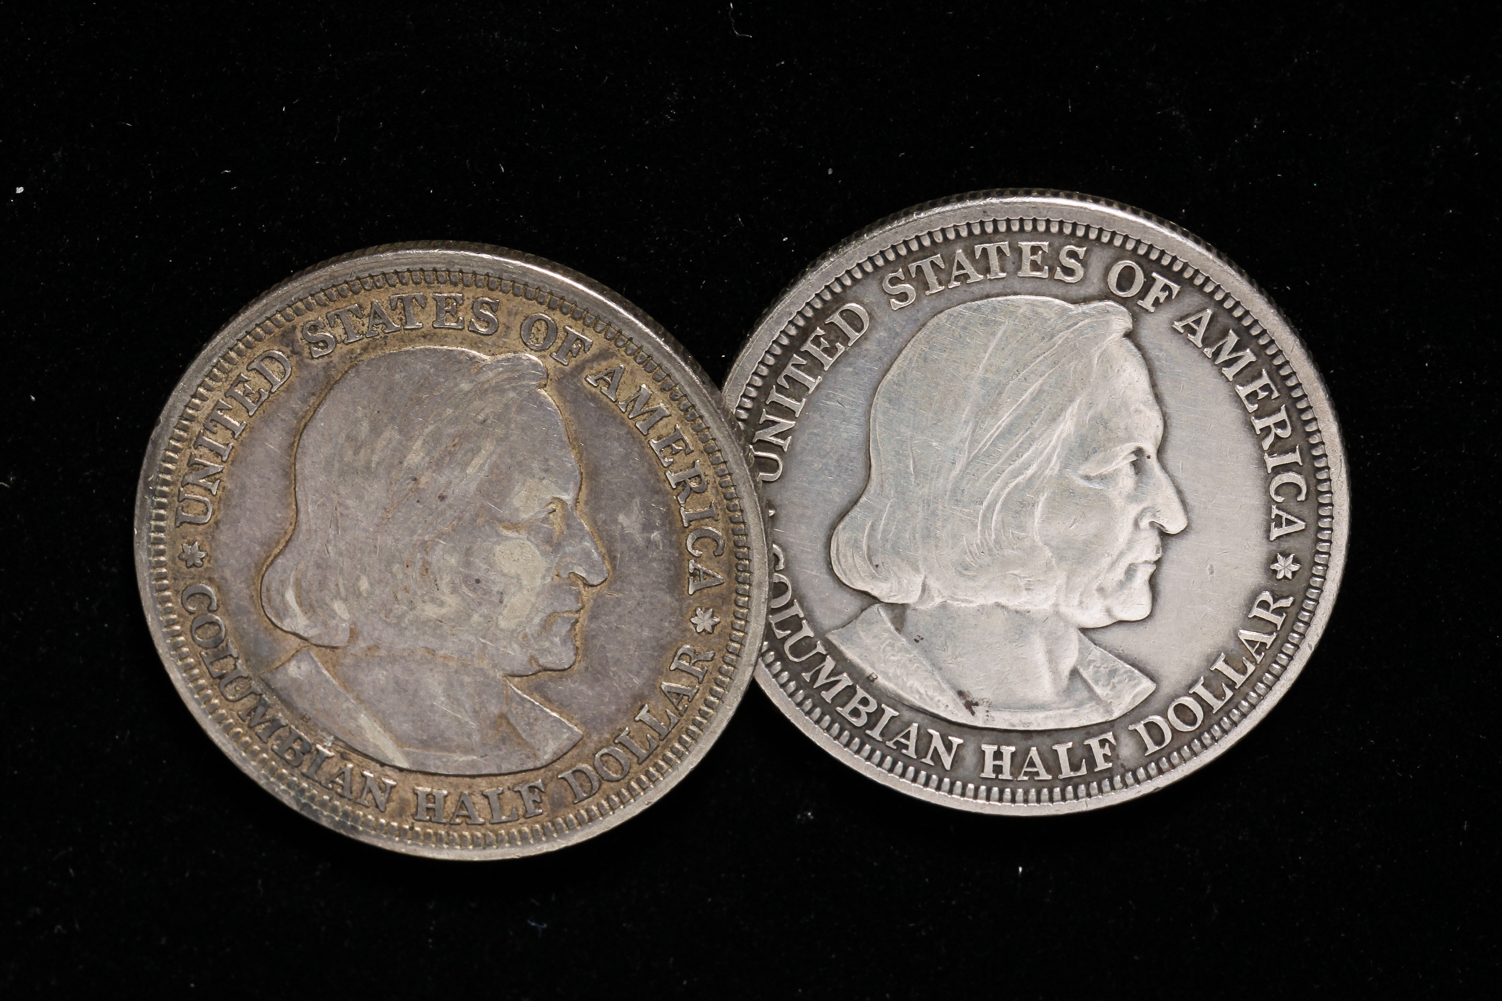 TWO 1893 COLUMBIAN EXPOSITION SILVER